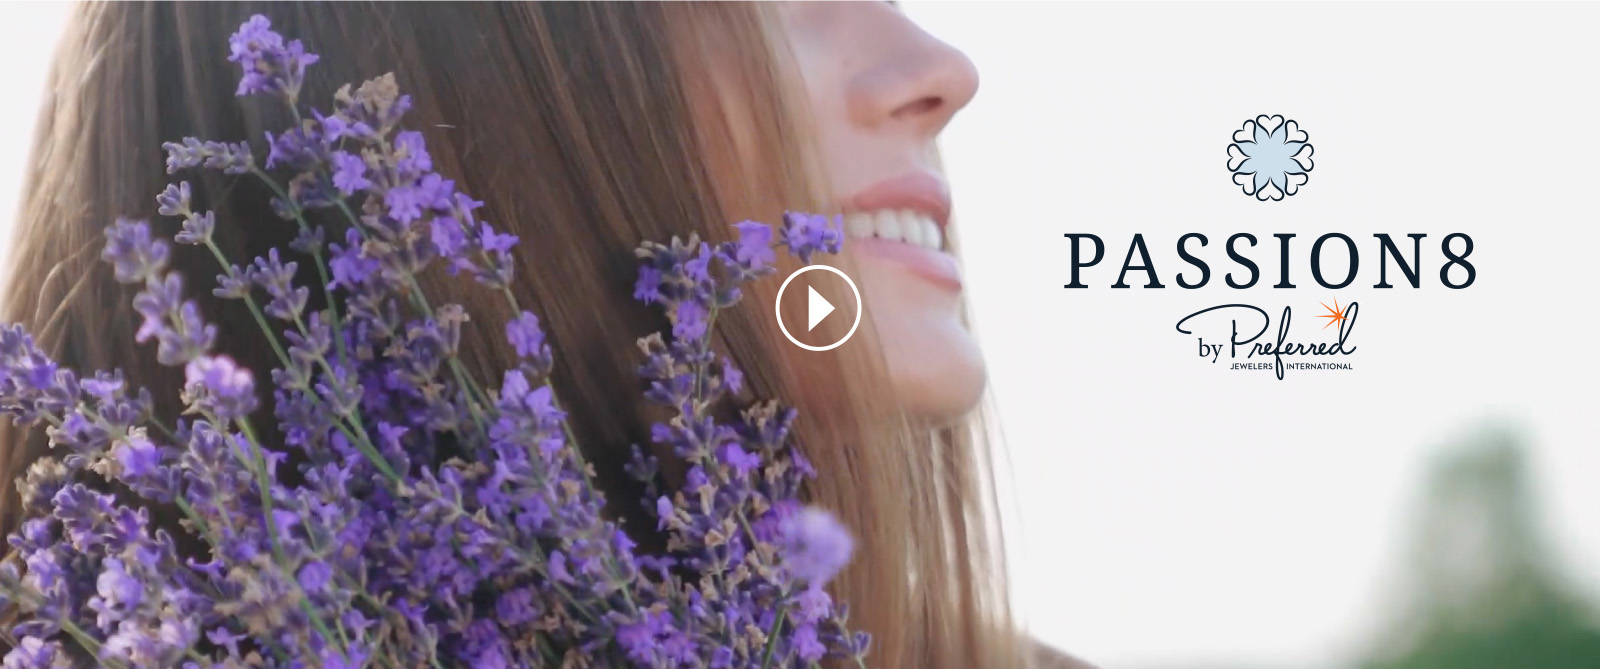 Passion 8 logo, woman holding flowers, video play button